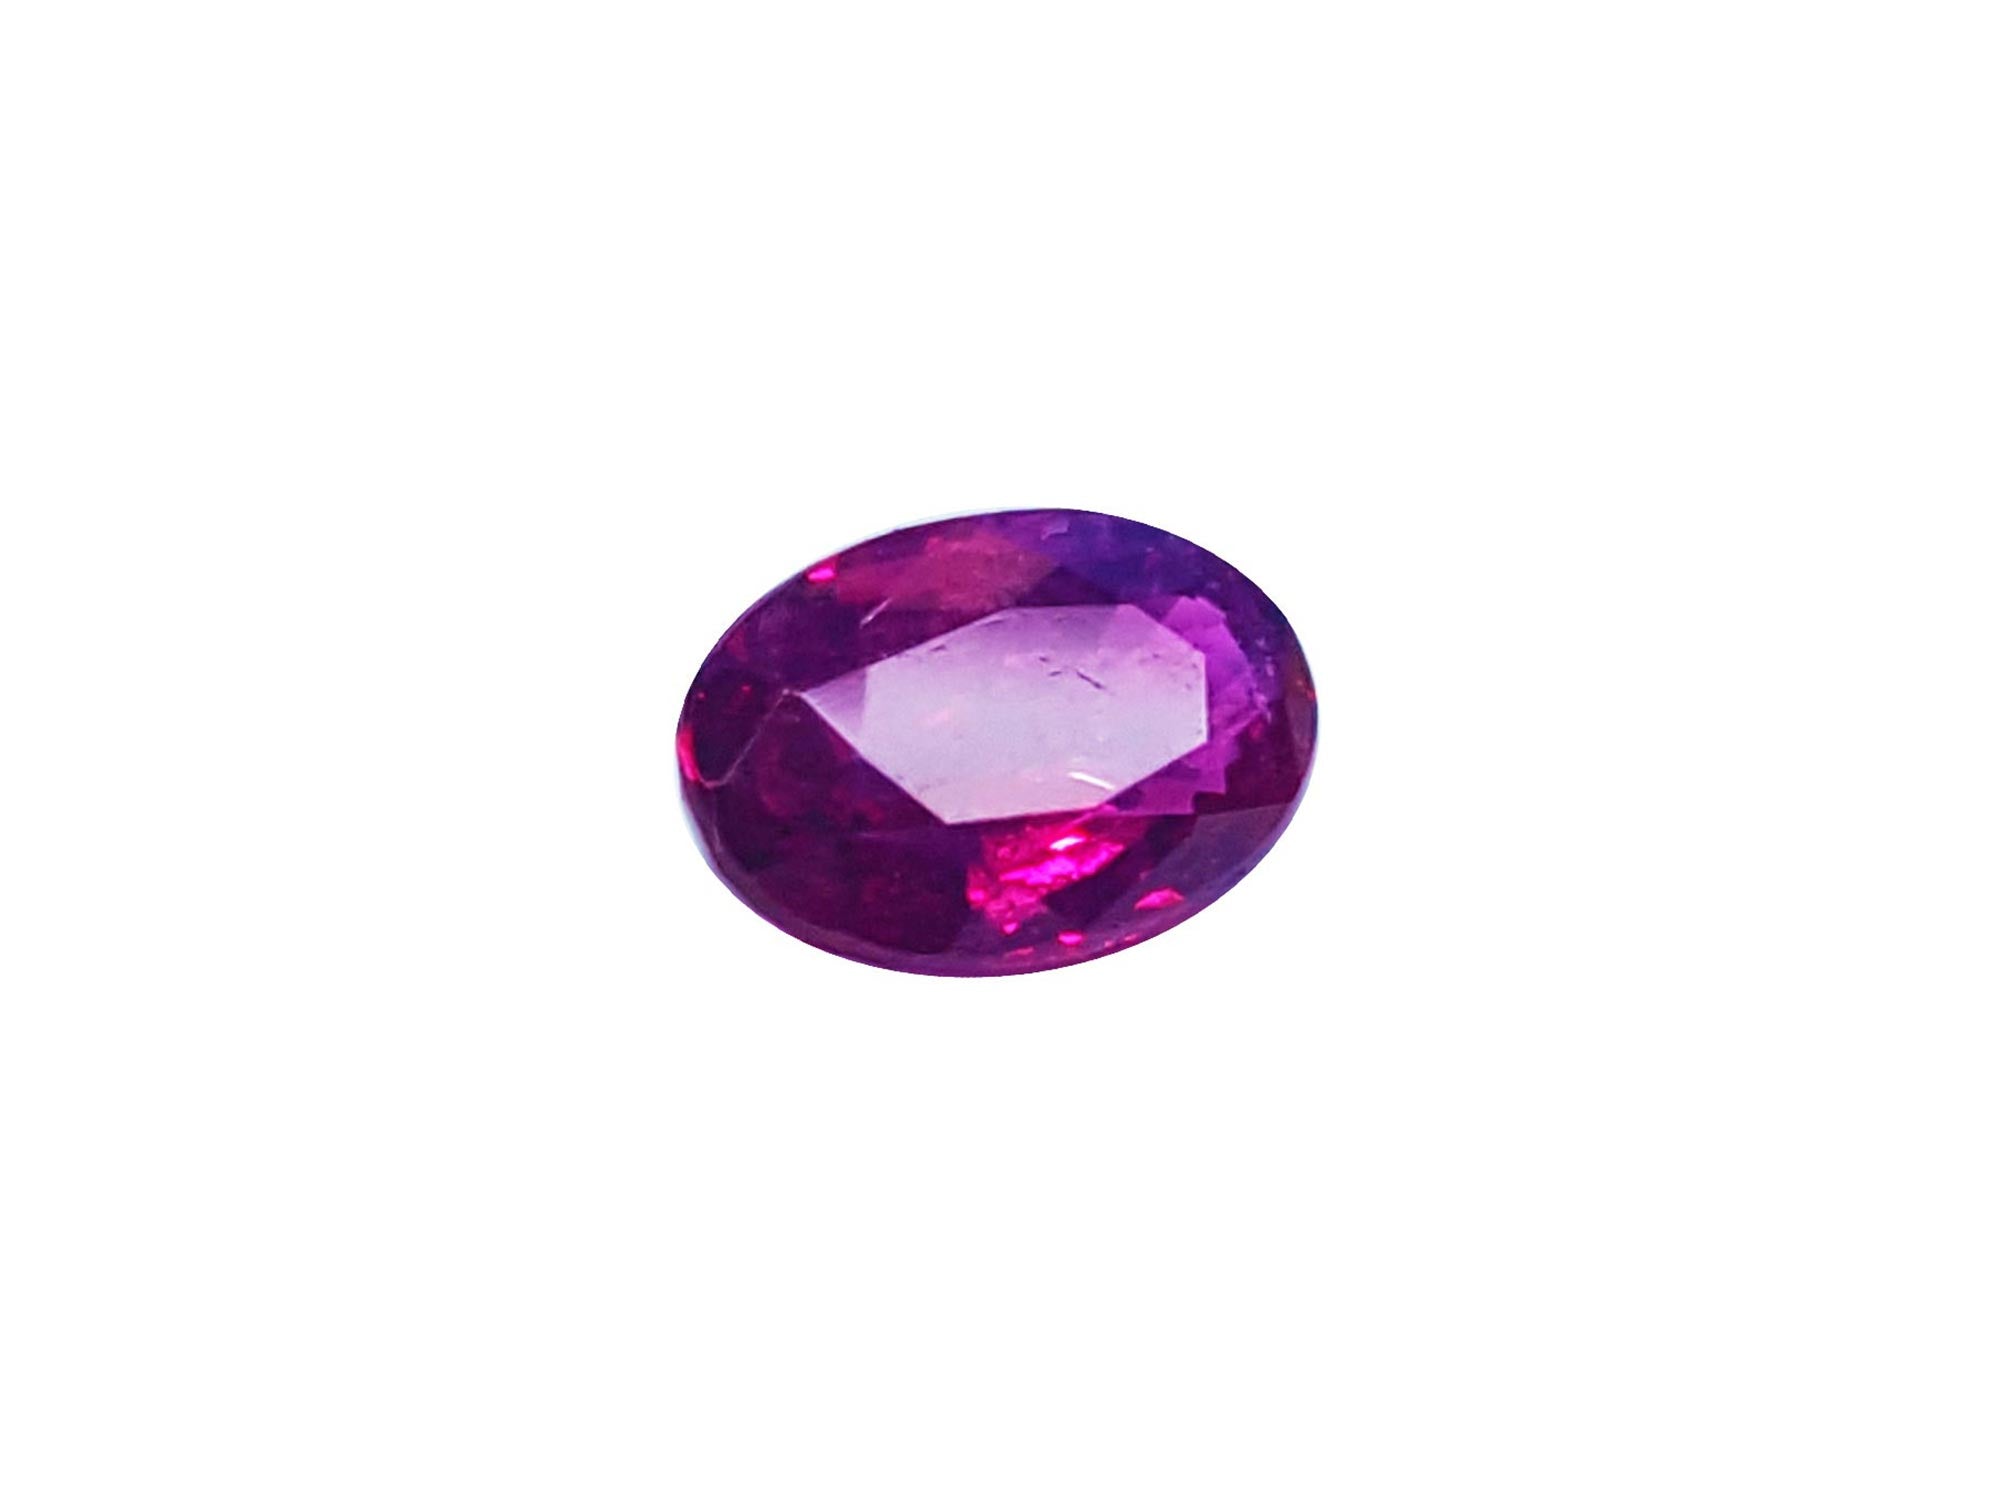 Genuine loose ruby for sale